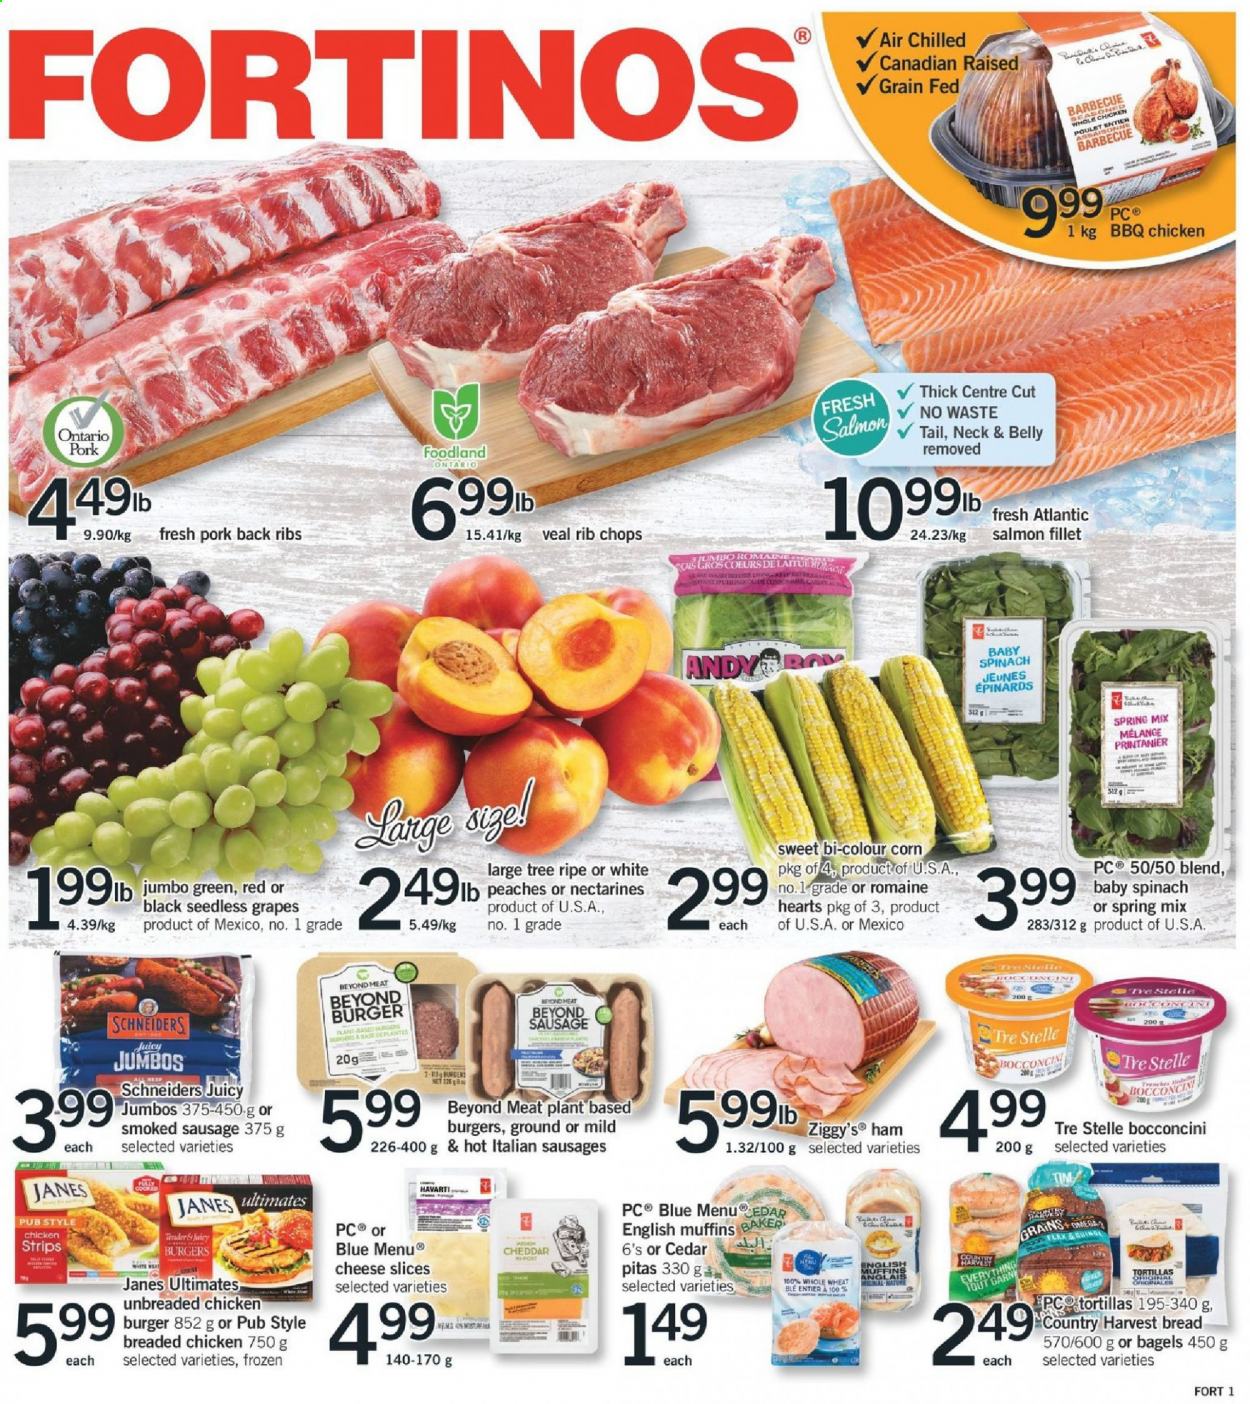 thumbnail - Fortinos Flyer - June 10, 2021 - June 16, 2021 - Sales products - bagels, bread, english muffins, tortillas, pita, corn, grapes, nectarines, seedless grapes, peaches, salmon, salmon fillet, hamburger, fried chicken, ham, sausage, smoked sausage, bocconcini, sliced cheese, cheddar, cheese, Country Harvest, strips, chicken strips, pork meat, pork ribs, pork back ribs, rib chops. Page 1.